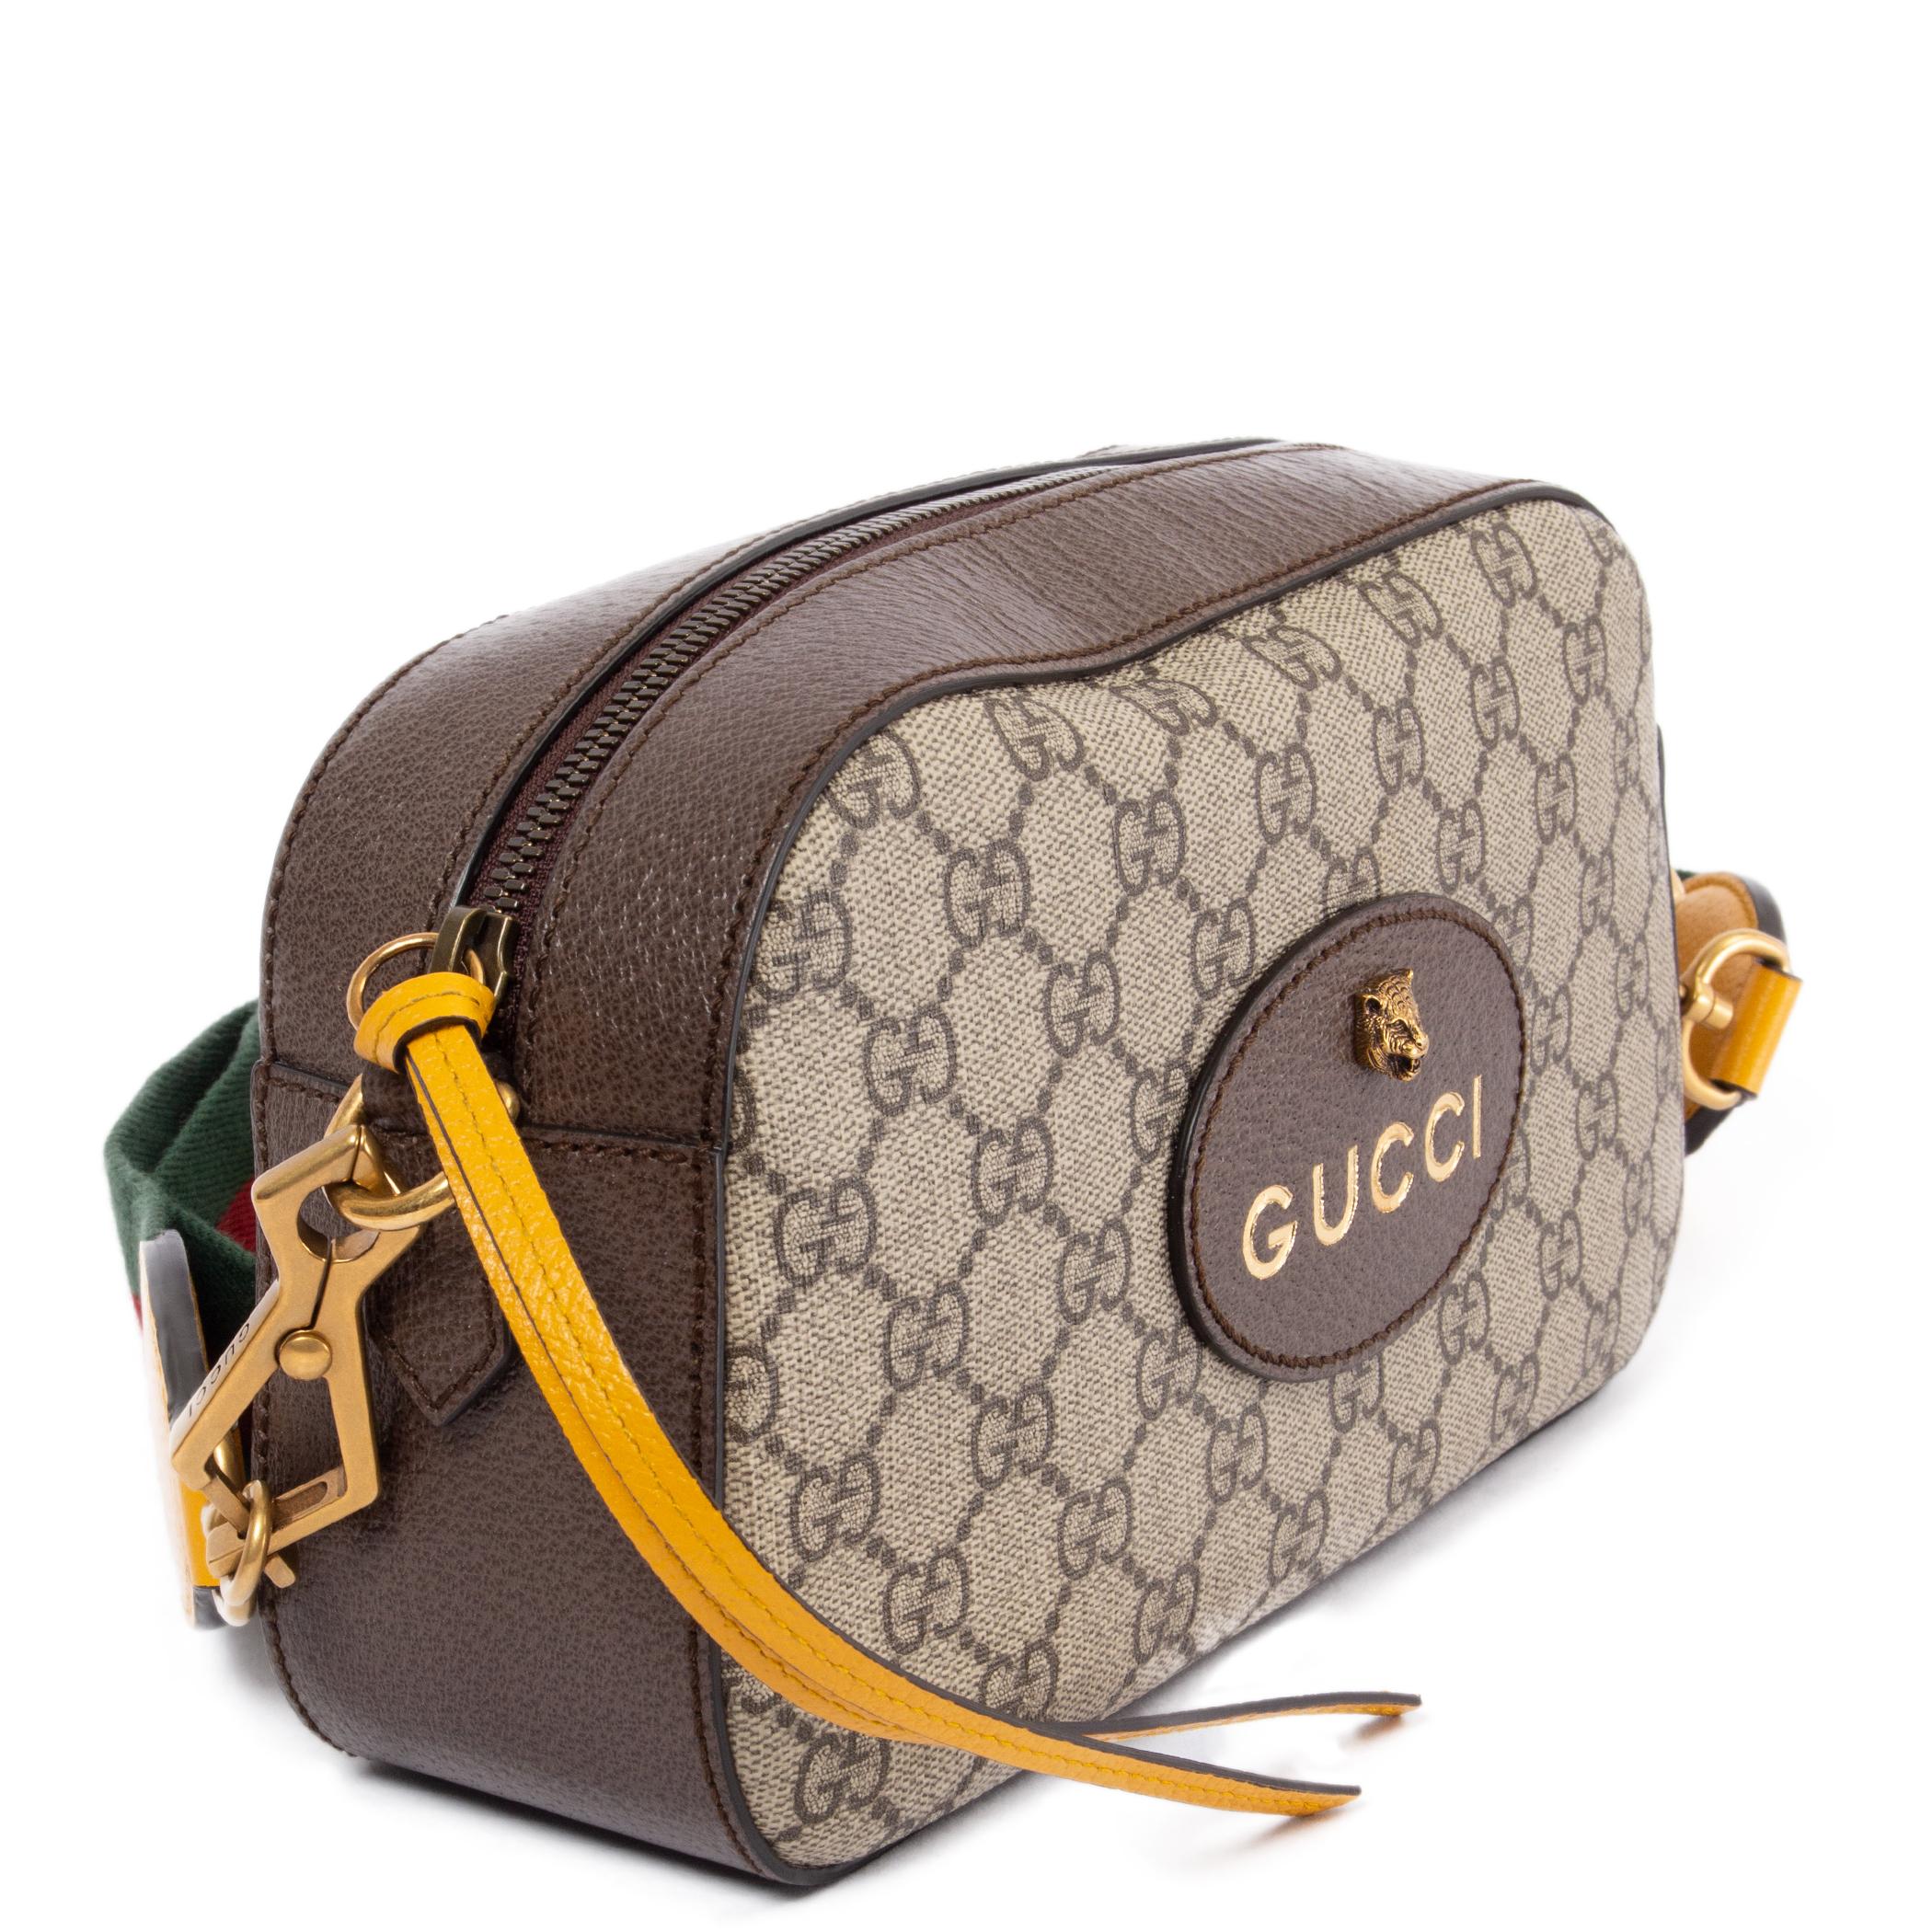 100% authentic Gucci Neo Vintage GG Supreme camera bag in ebony and beige coated monogram canvas with yellow and brown leather details. The contrast trims pay homage to the House’s past, when artisans would repair luggage by replacing worn areas